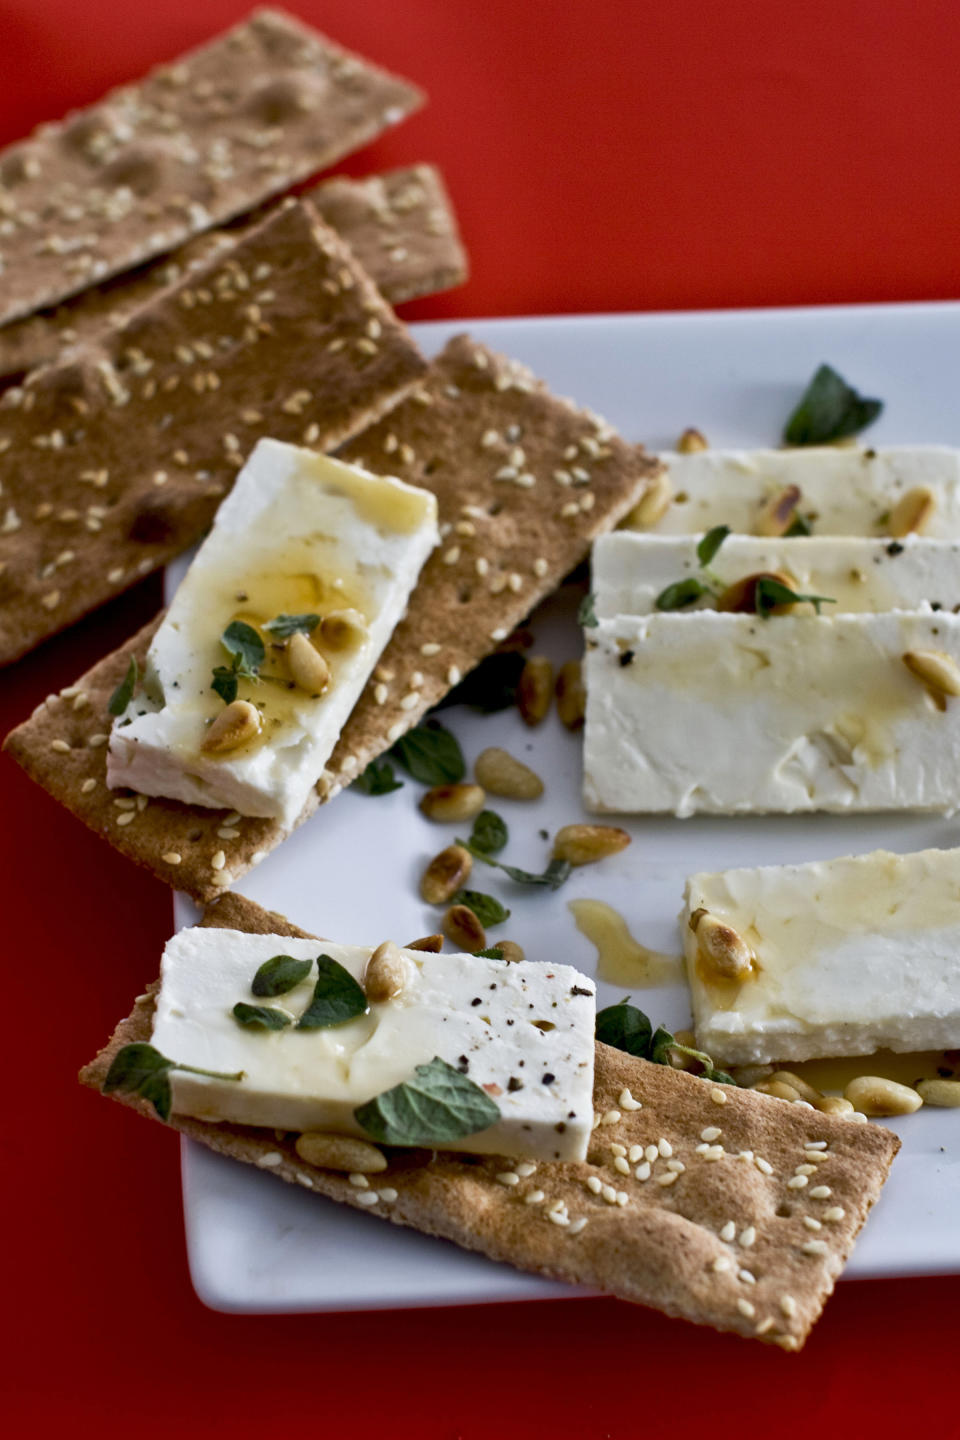 In this undated image, feta cheese and honey are shown served on a platter in Concord, N.H. (AP Photo/Matthew Mead)